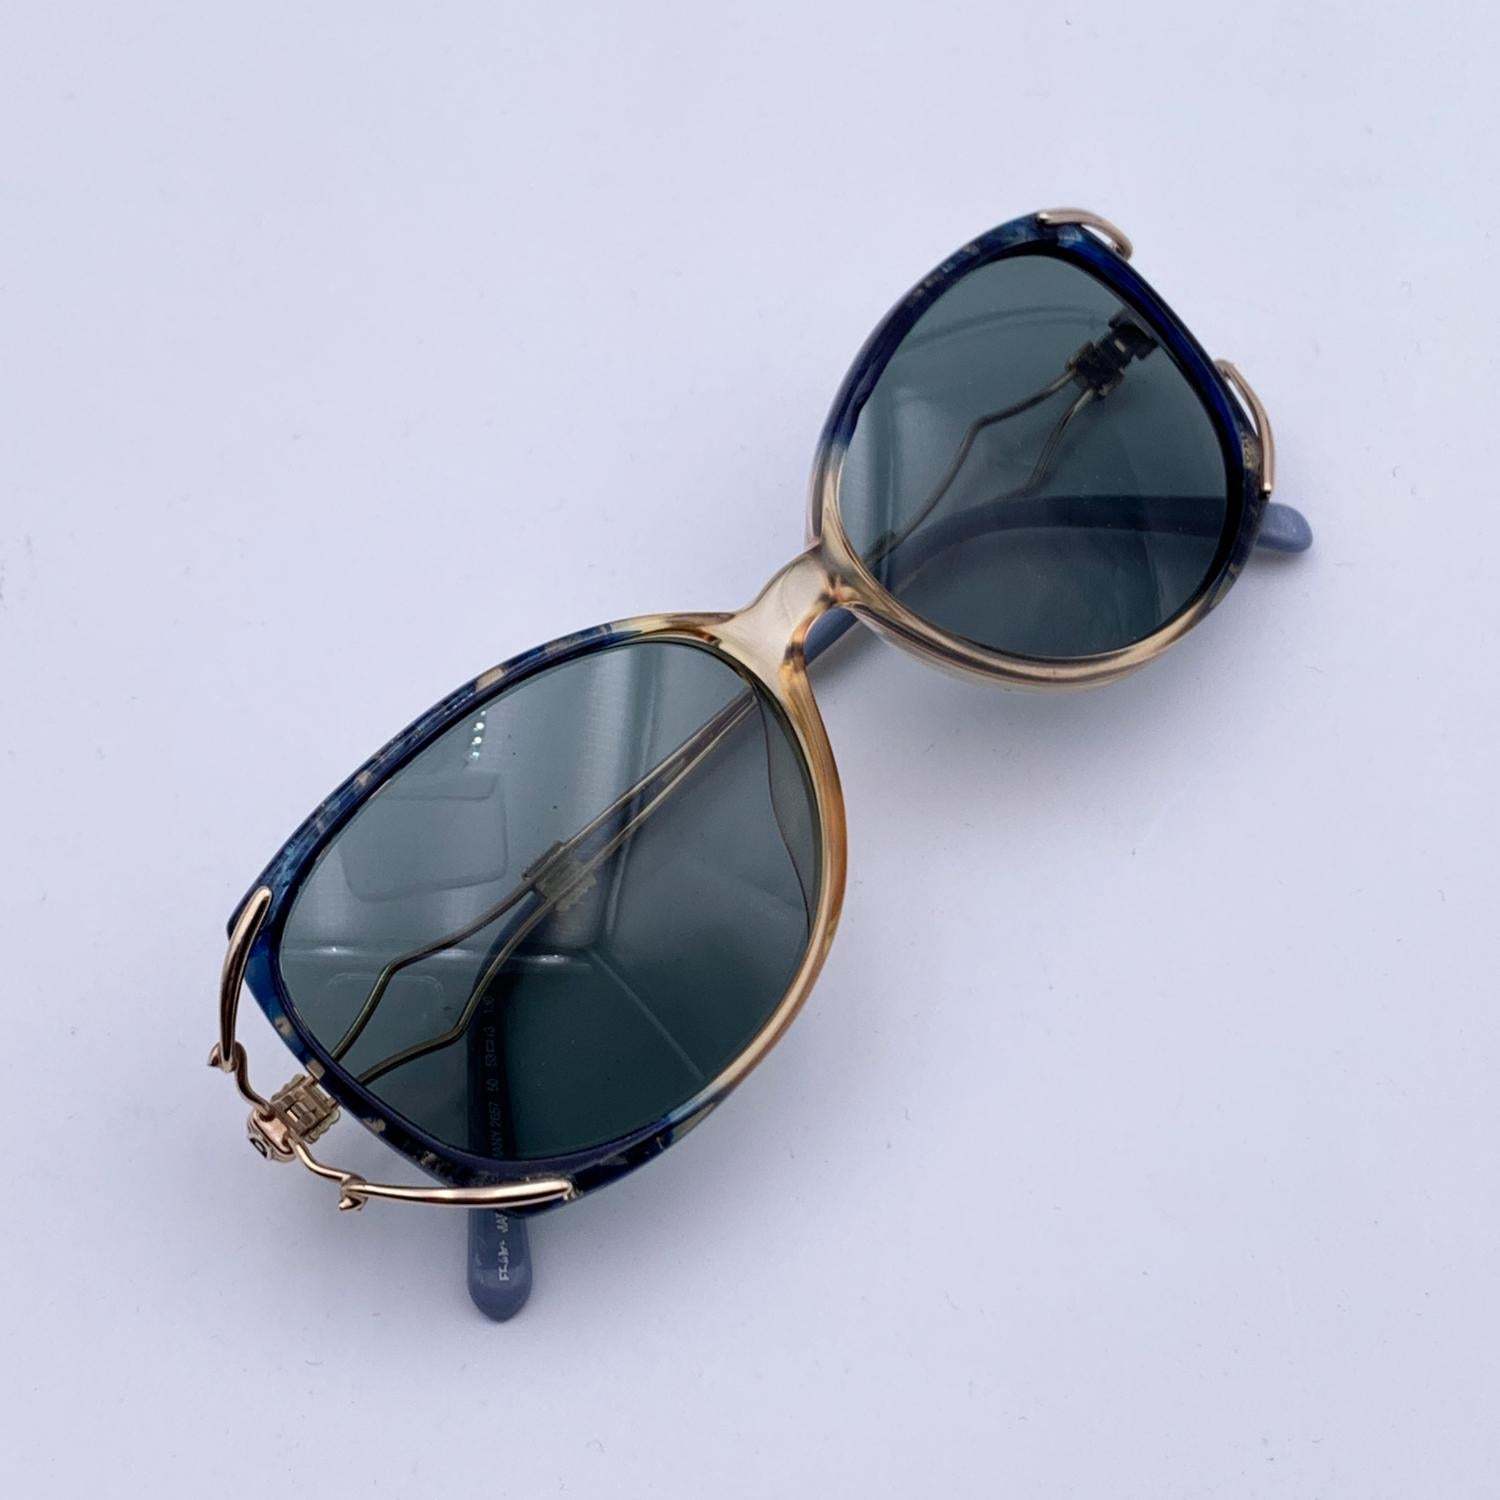 Vintage Christian Dior sunglasses, Mod. 2667 - Col 50. Clear and blue acetate front with gold metal ear stems. Original 100% Total UVA/UVB protection gradient lenses in light blue color. CD logo on temples. Made in Germany

Details

MATERIAL: